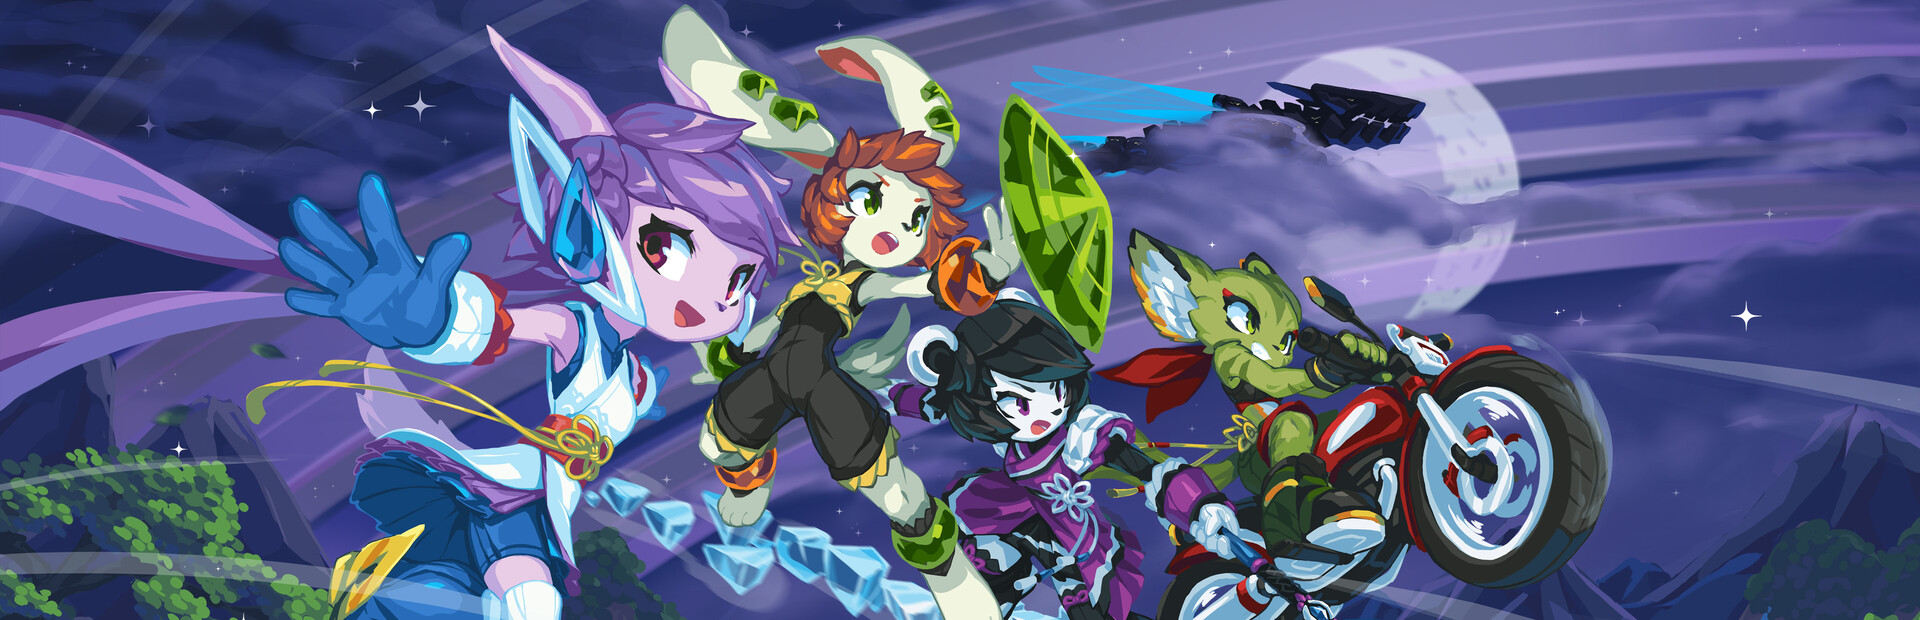 Freedom Planet 2 cover image